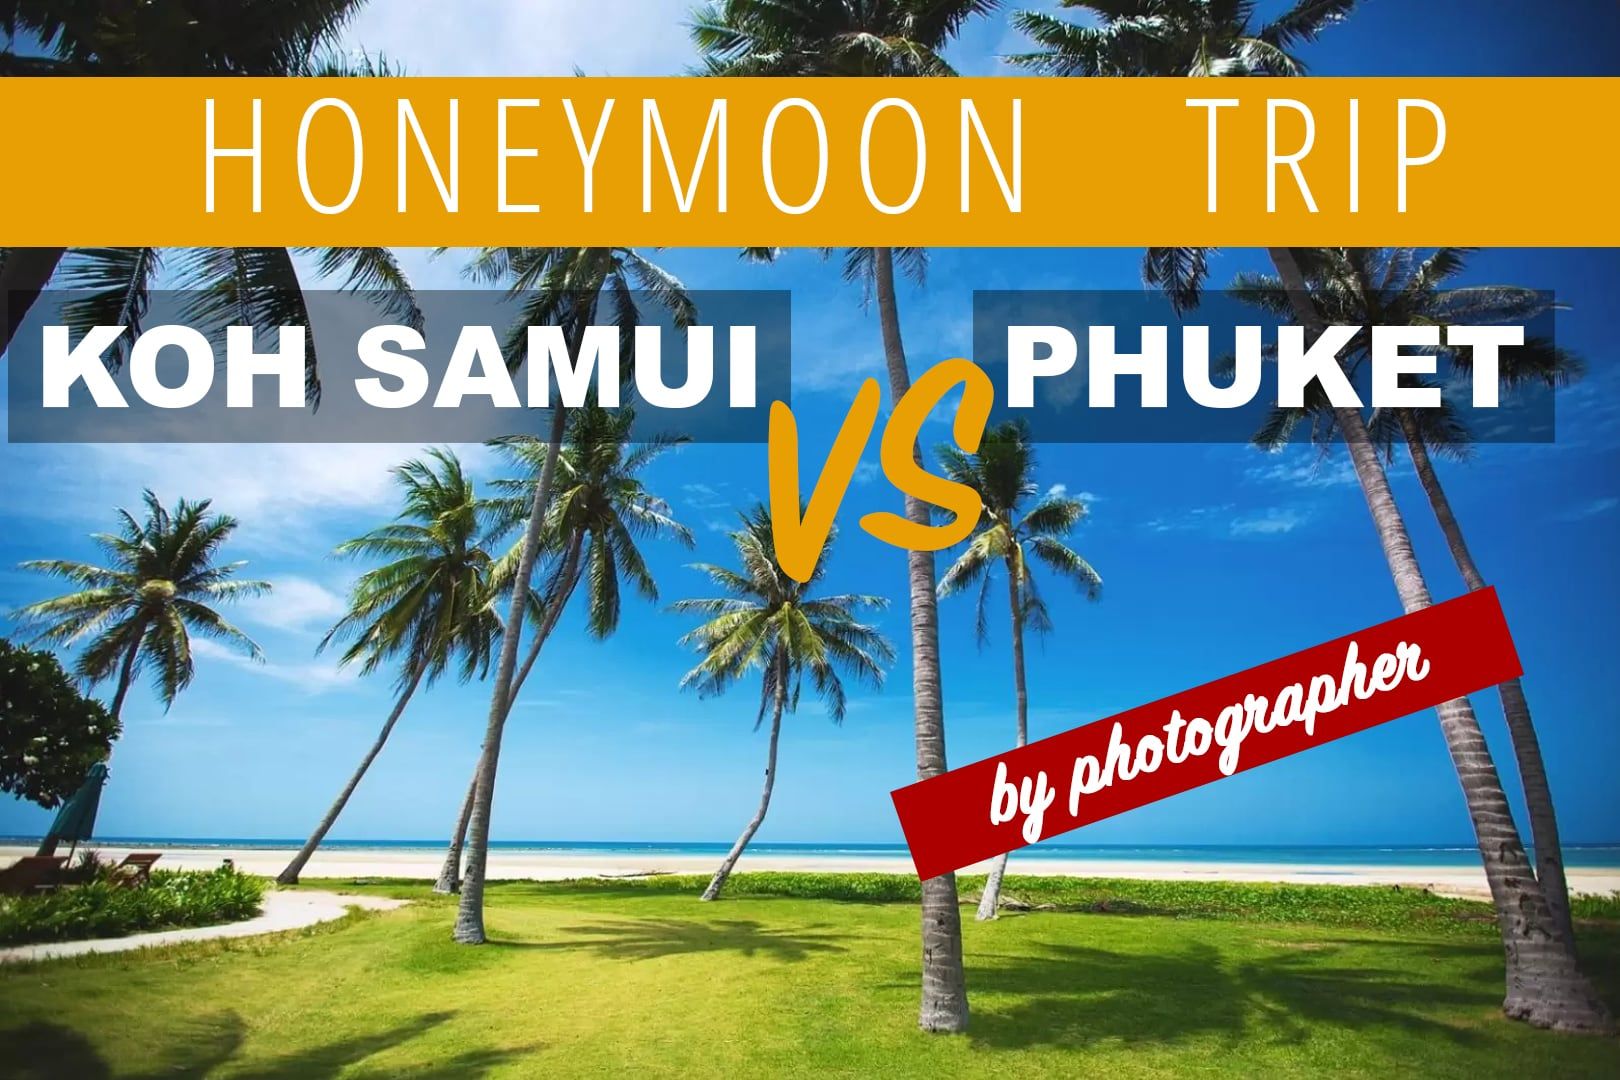 Pictures for post about Koh Samui or Phuket for Honeymoon - 7 Reasons from Photographer